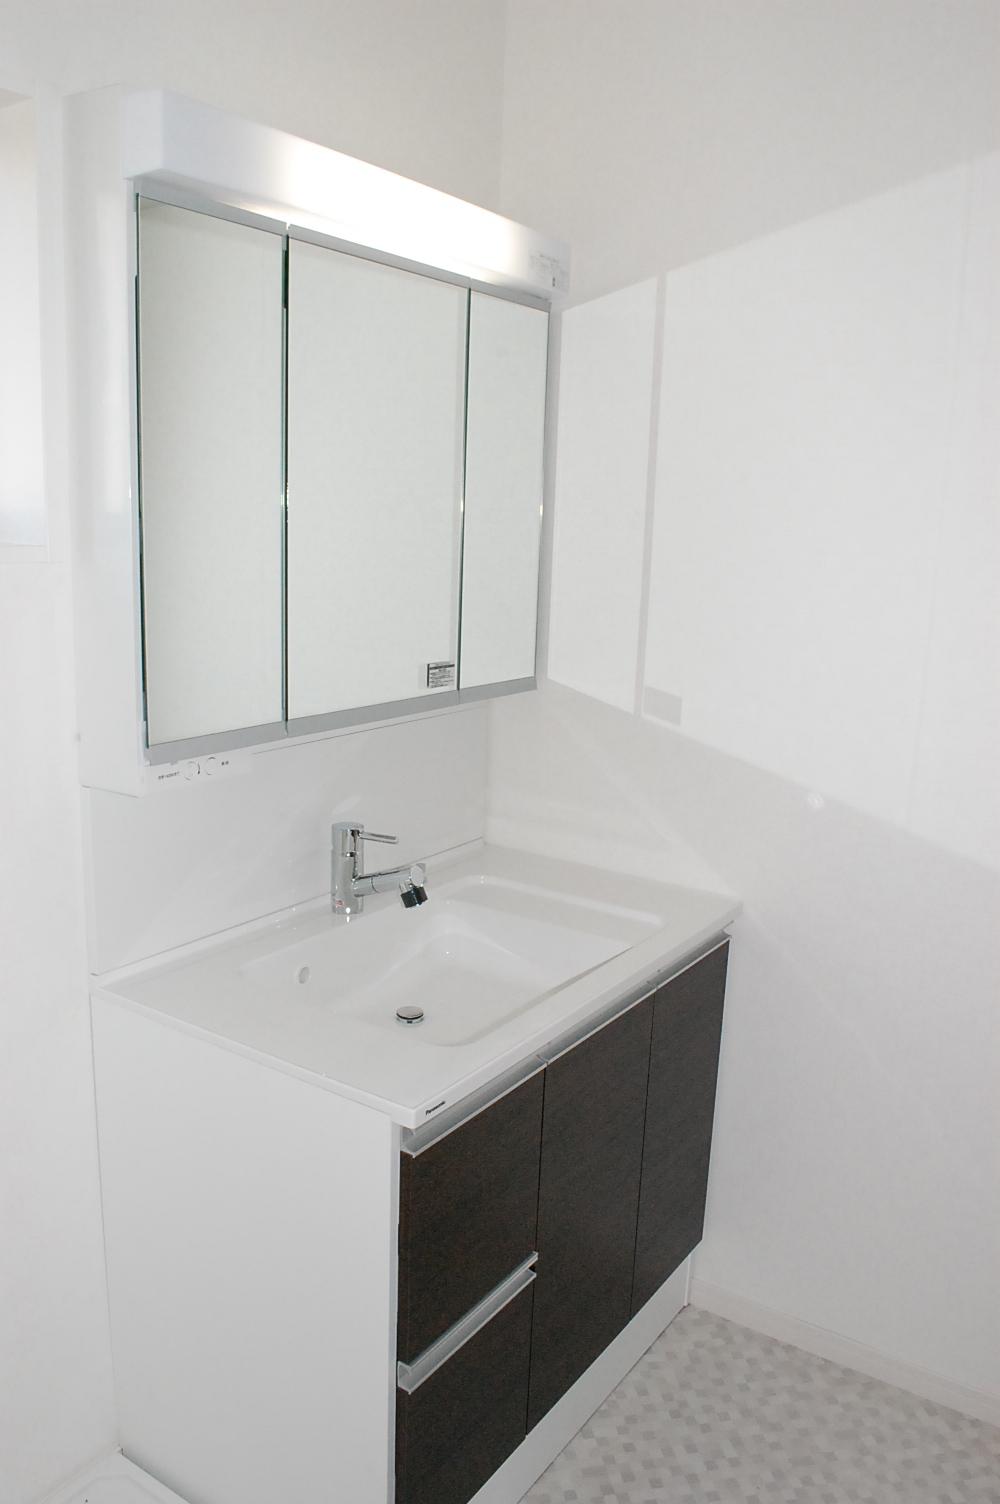 Wash basin, toilet. Shower Faucets. Wide three-sided mirror.